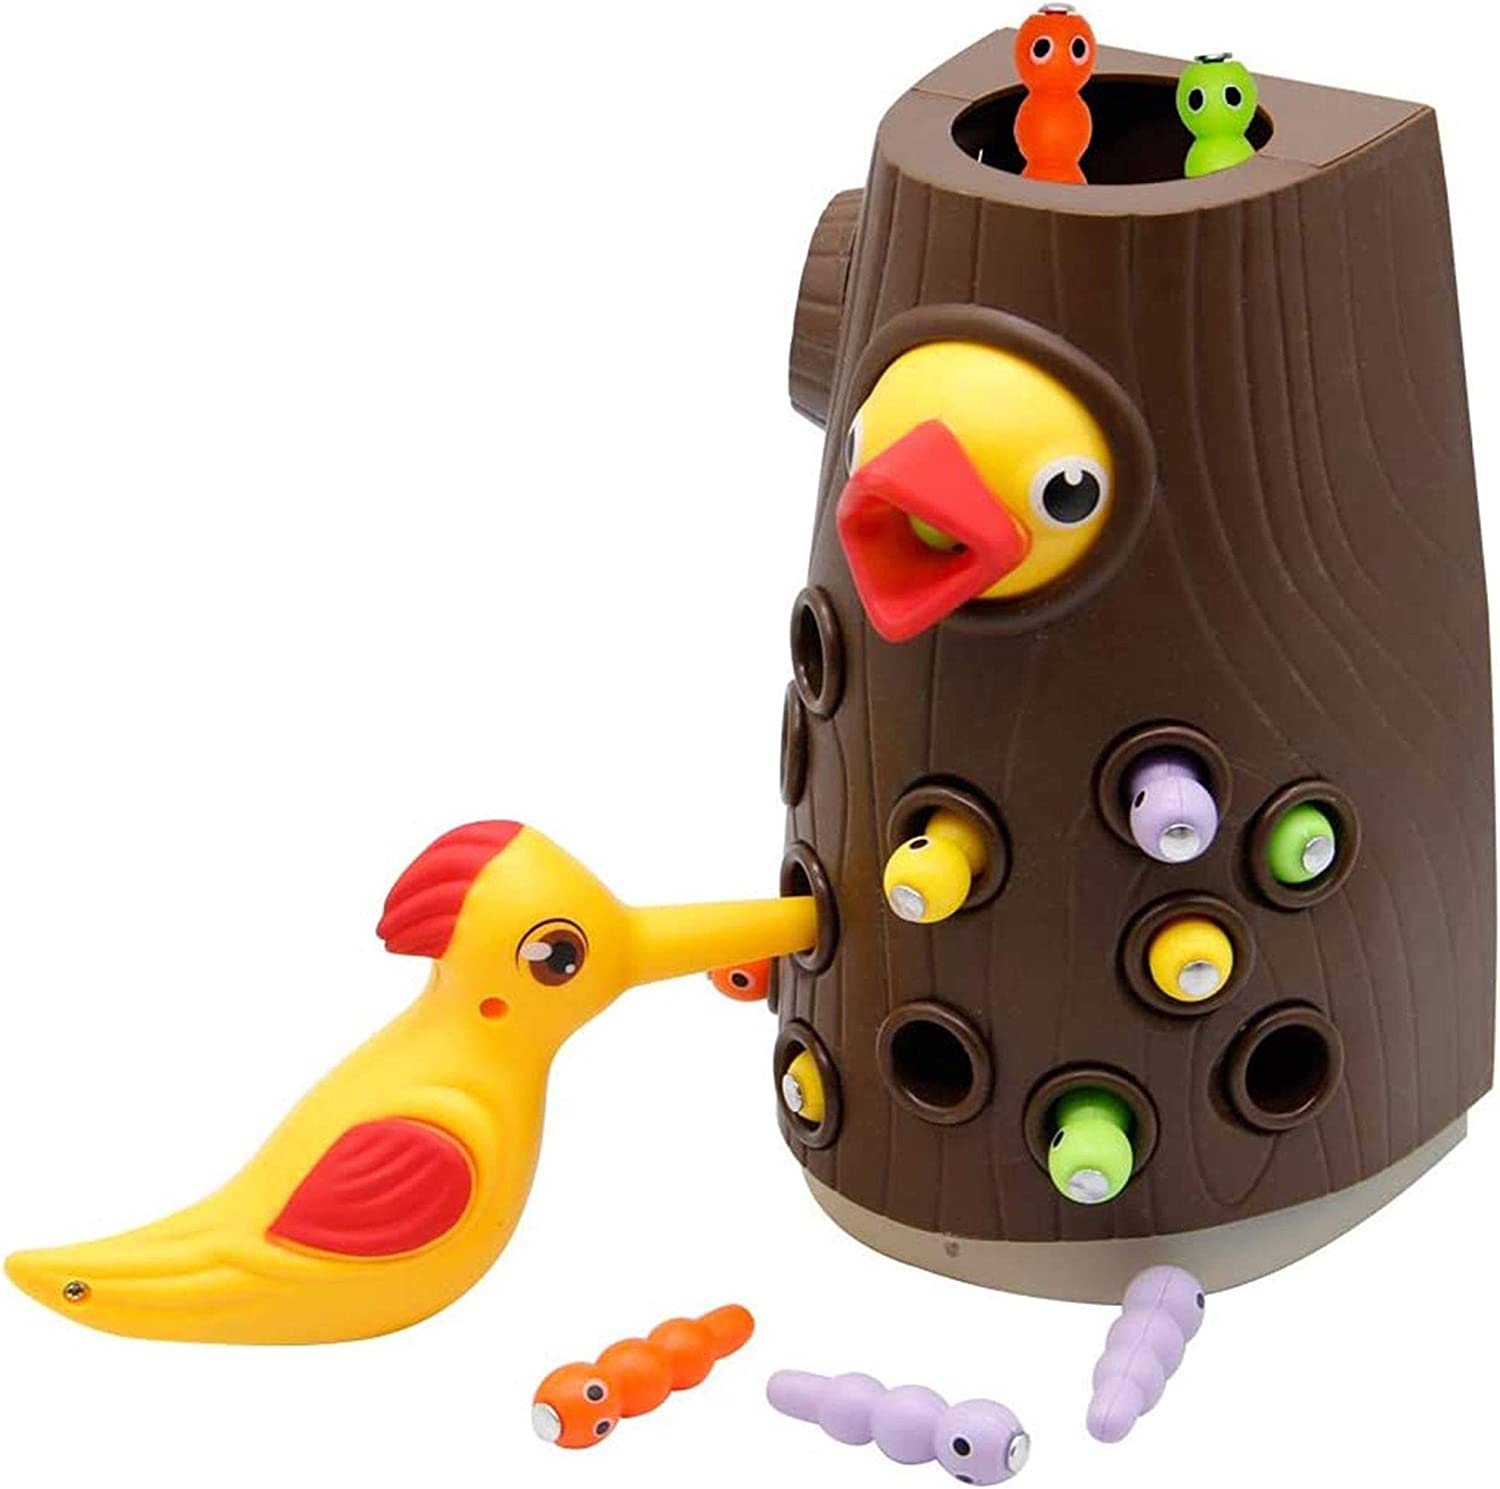 Montessori Woodpecker's Magnetic Catch and Feed